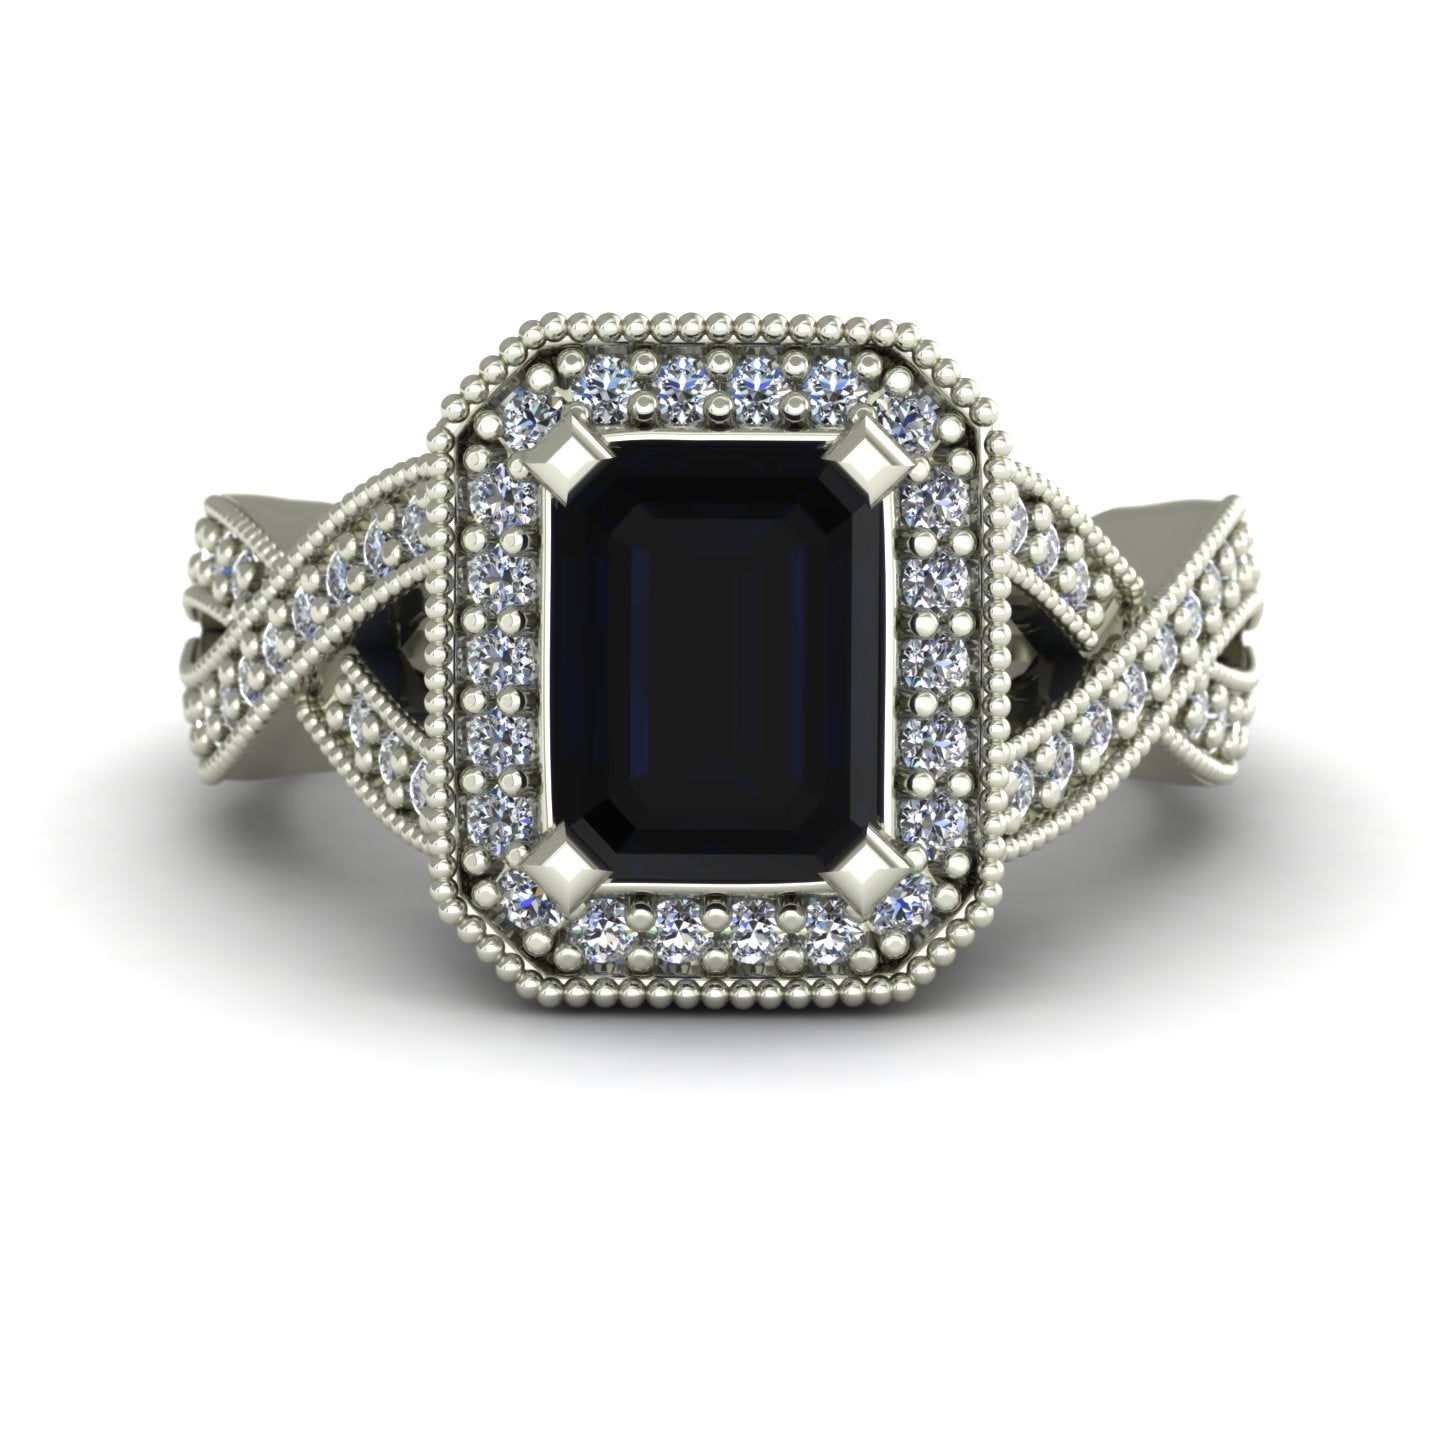 emerald cut blue sapphire and diamond halo ring crossover shank in 14k white gold - Charles Babb Designs - top view